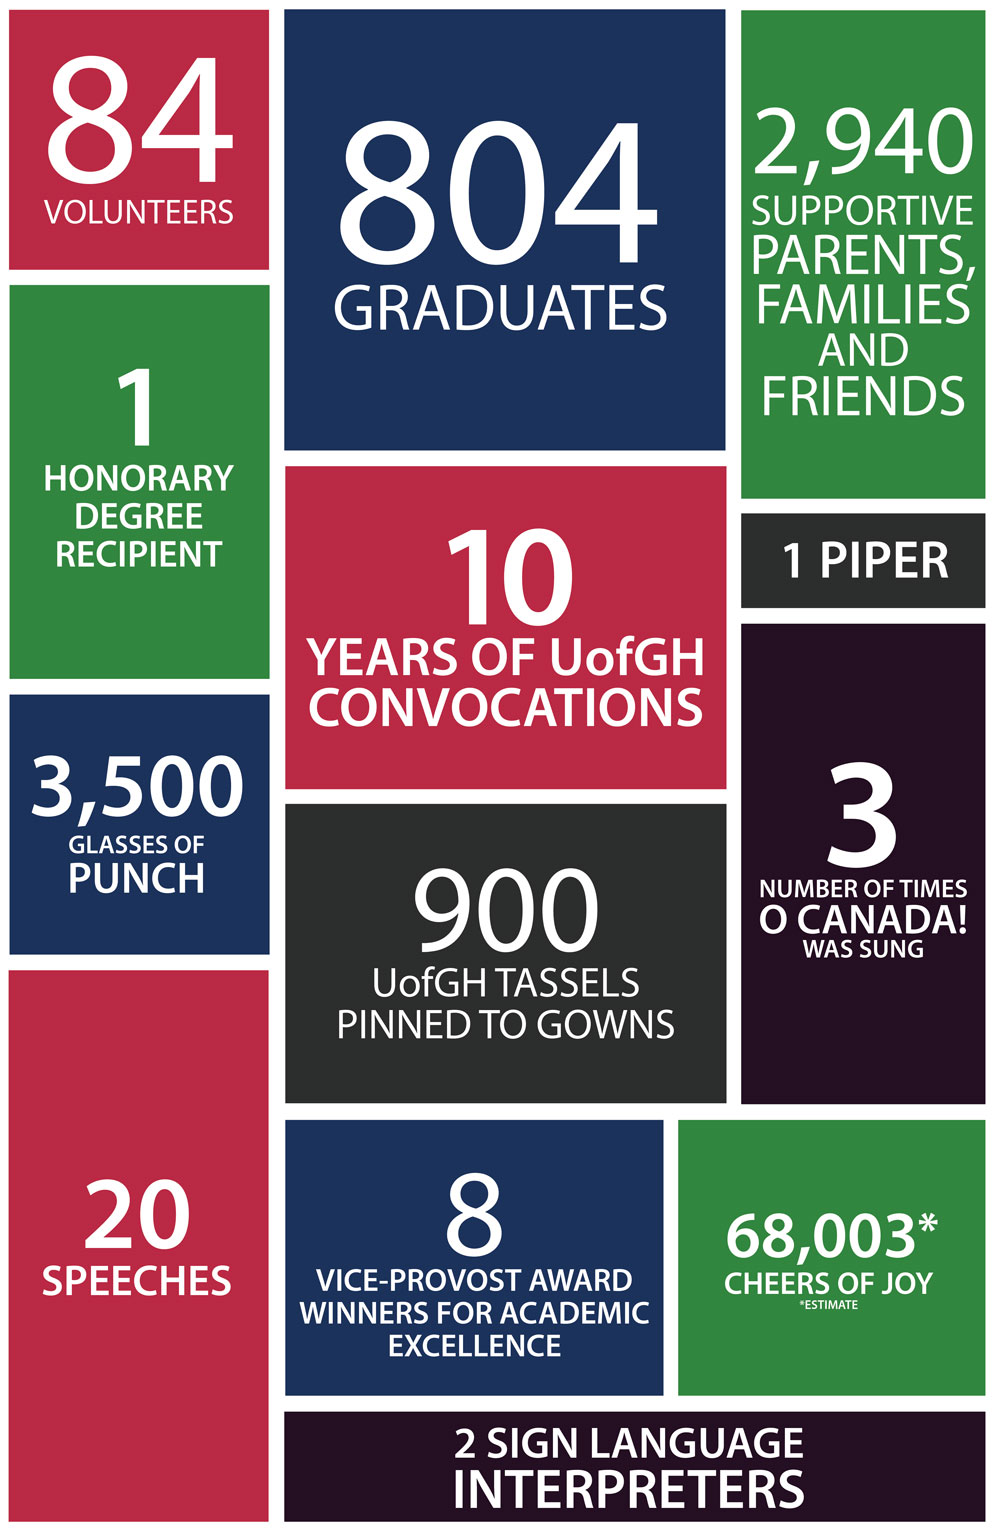 Colourful squares containing the following text: 84 volunteers, 804 graduates, 2940 supportive parents families and friends, 1 honorary degree recipient, 10 years of UofGH Convocations, 1 piper, 3500 glasses of punch, 900 UofGH tassels pinned to gowns, 3 number of times O Canada! was sung, 20 speeches, 8 Vice-Provost award winners for academic excellence, 68003 cheers of joy *estimate, 2 sign language interpreters